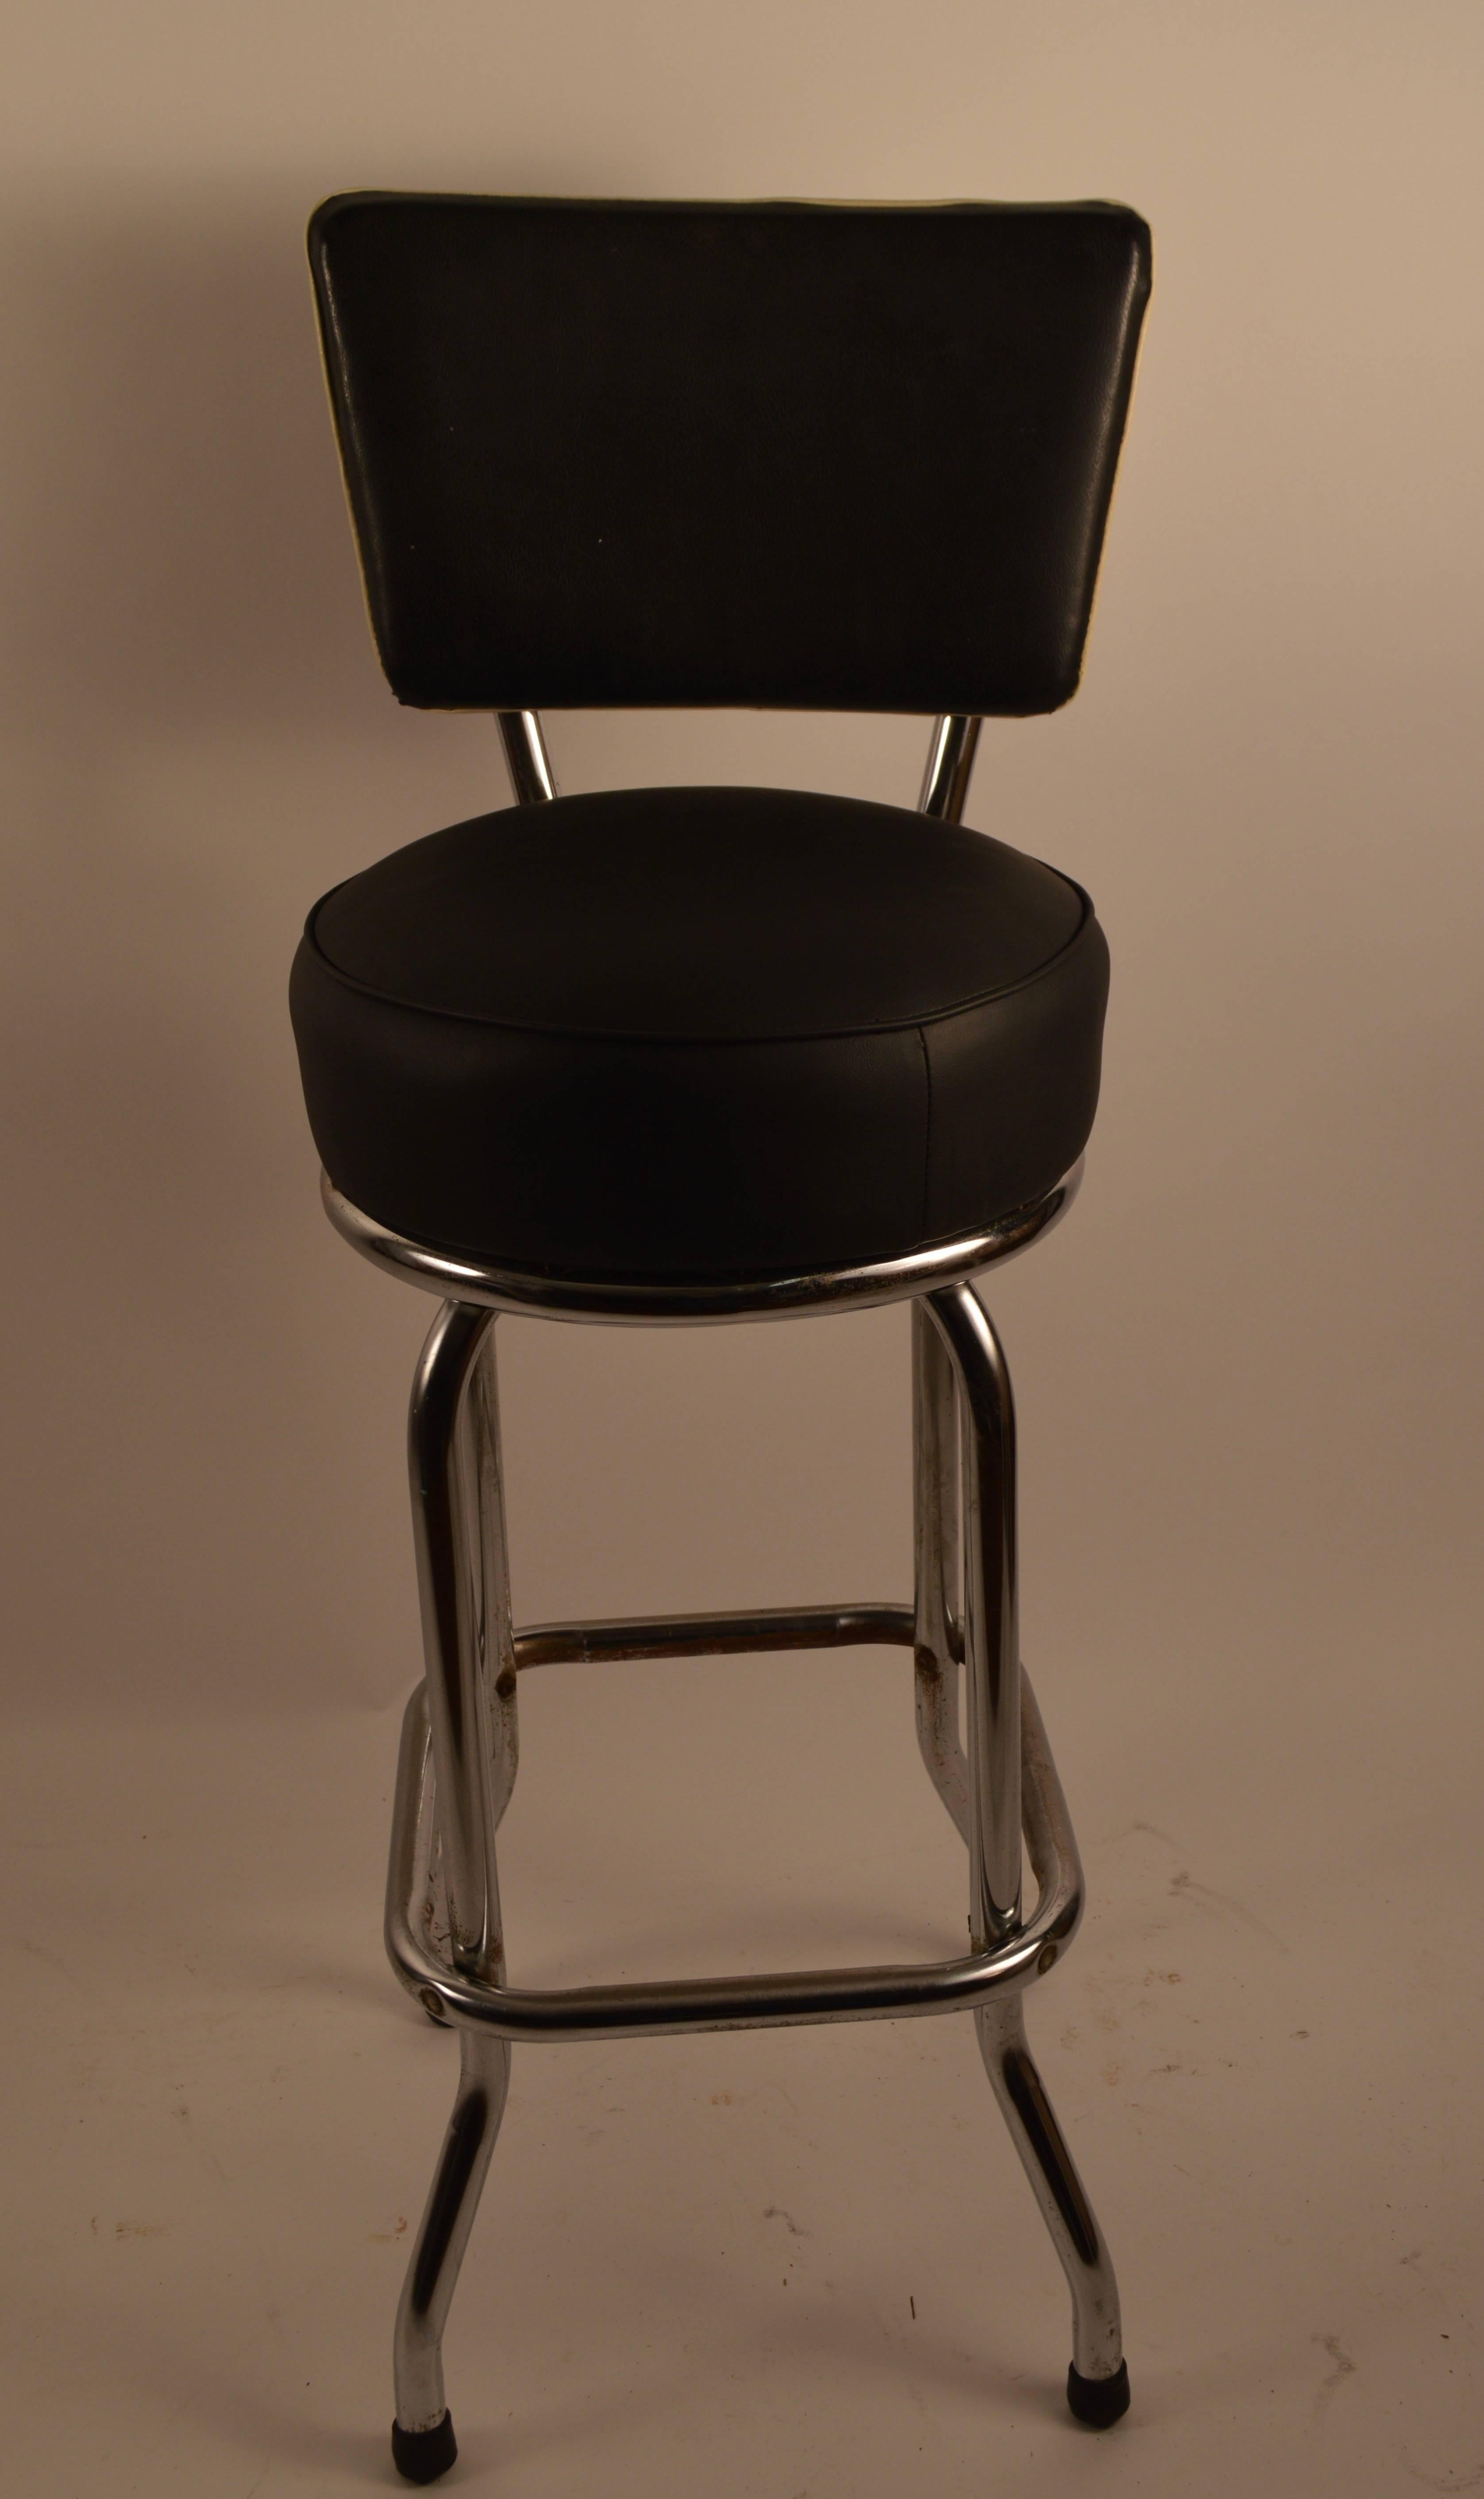 Hard to find the model, swivel stools with an upholstered back rest. Freshly upholstered seats, with original upholstery back rests. The chrome is in good condition, showing only very light surface rust, normal and consistent with age.